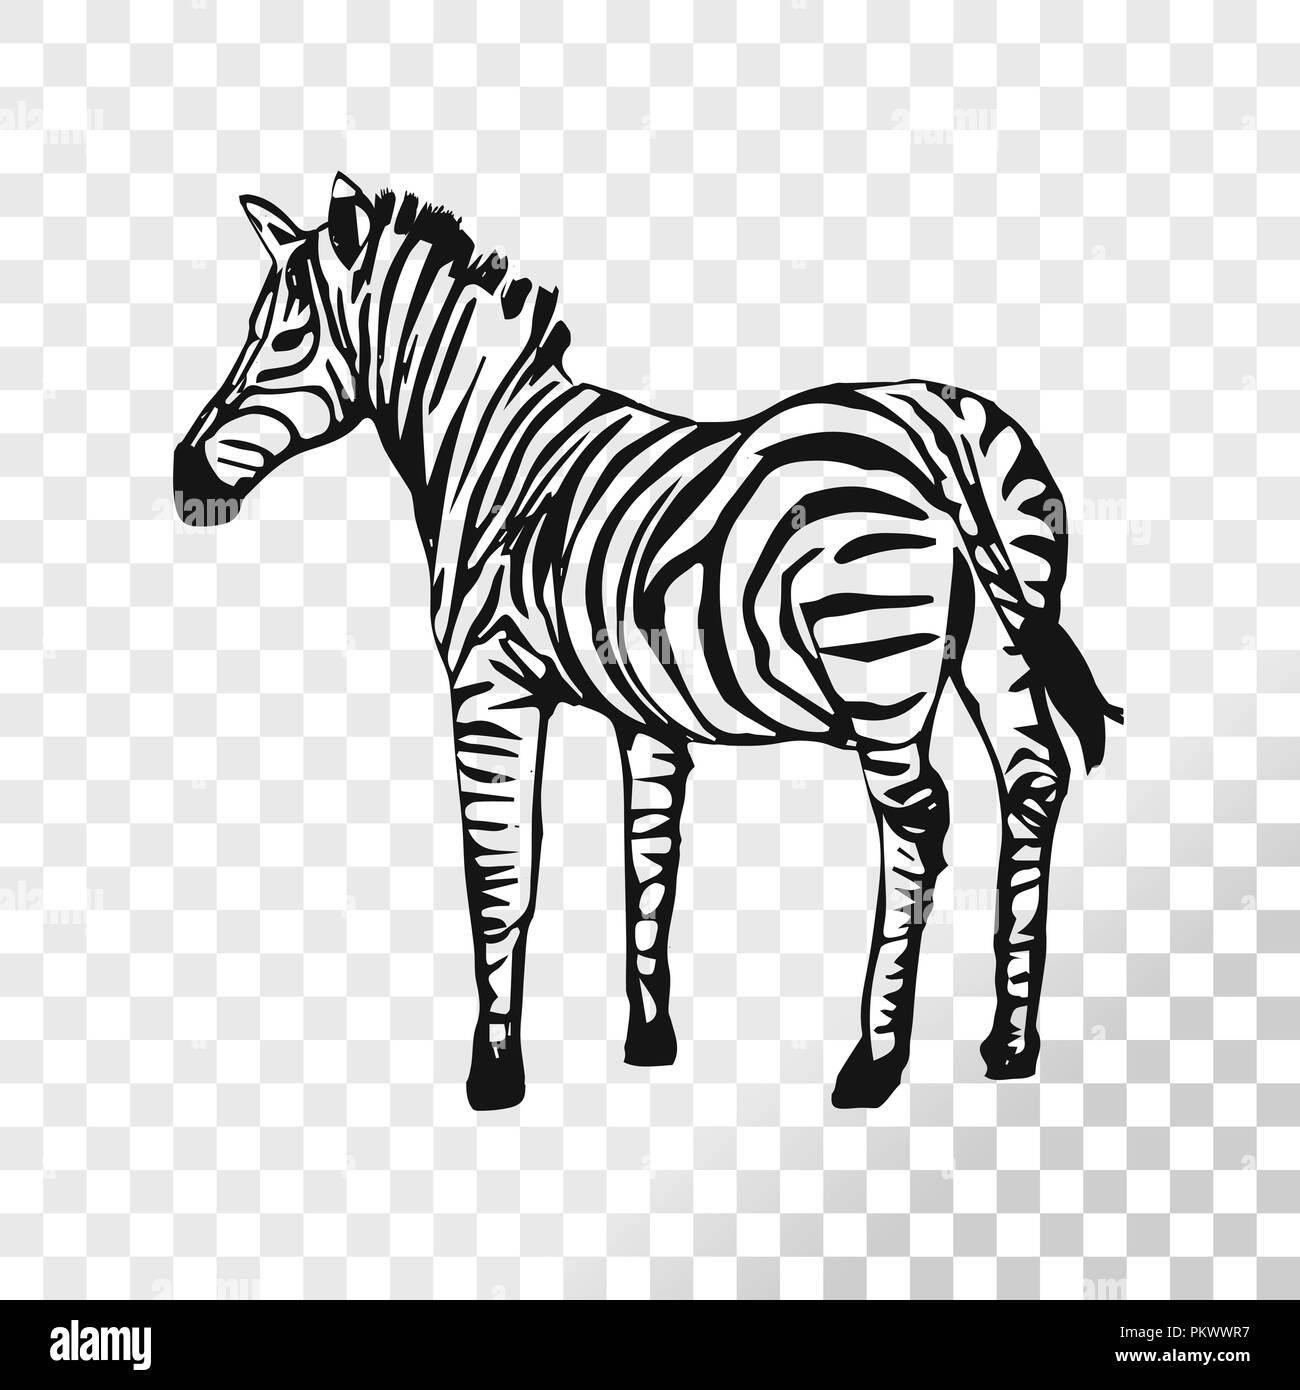 Zebra sketch isolated on transparent background. Hand drawn stripped horse vector. Stock Vector